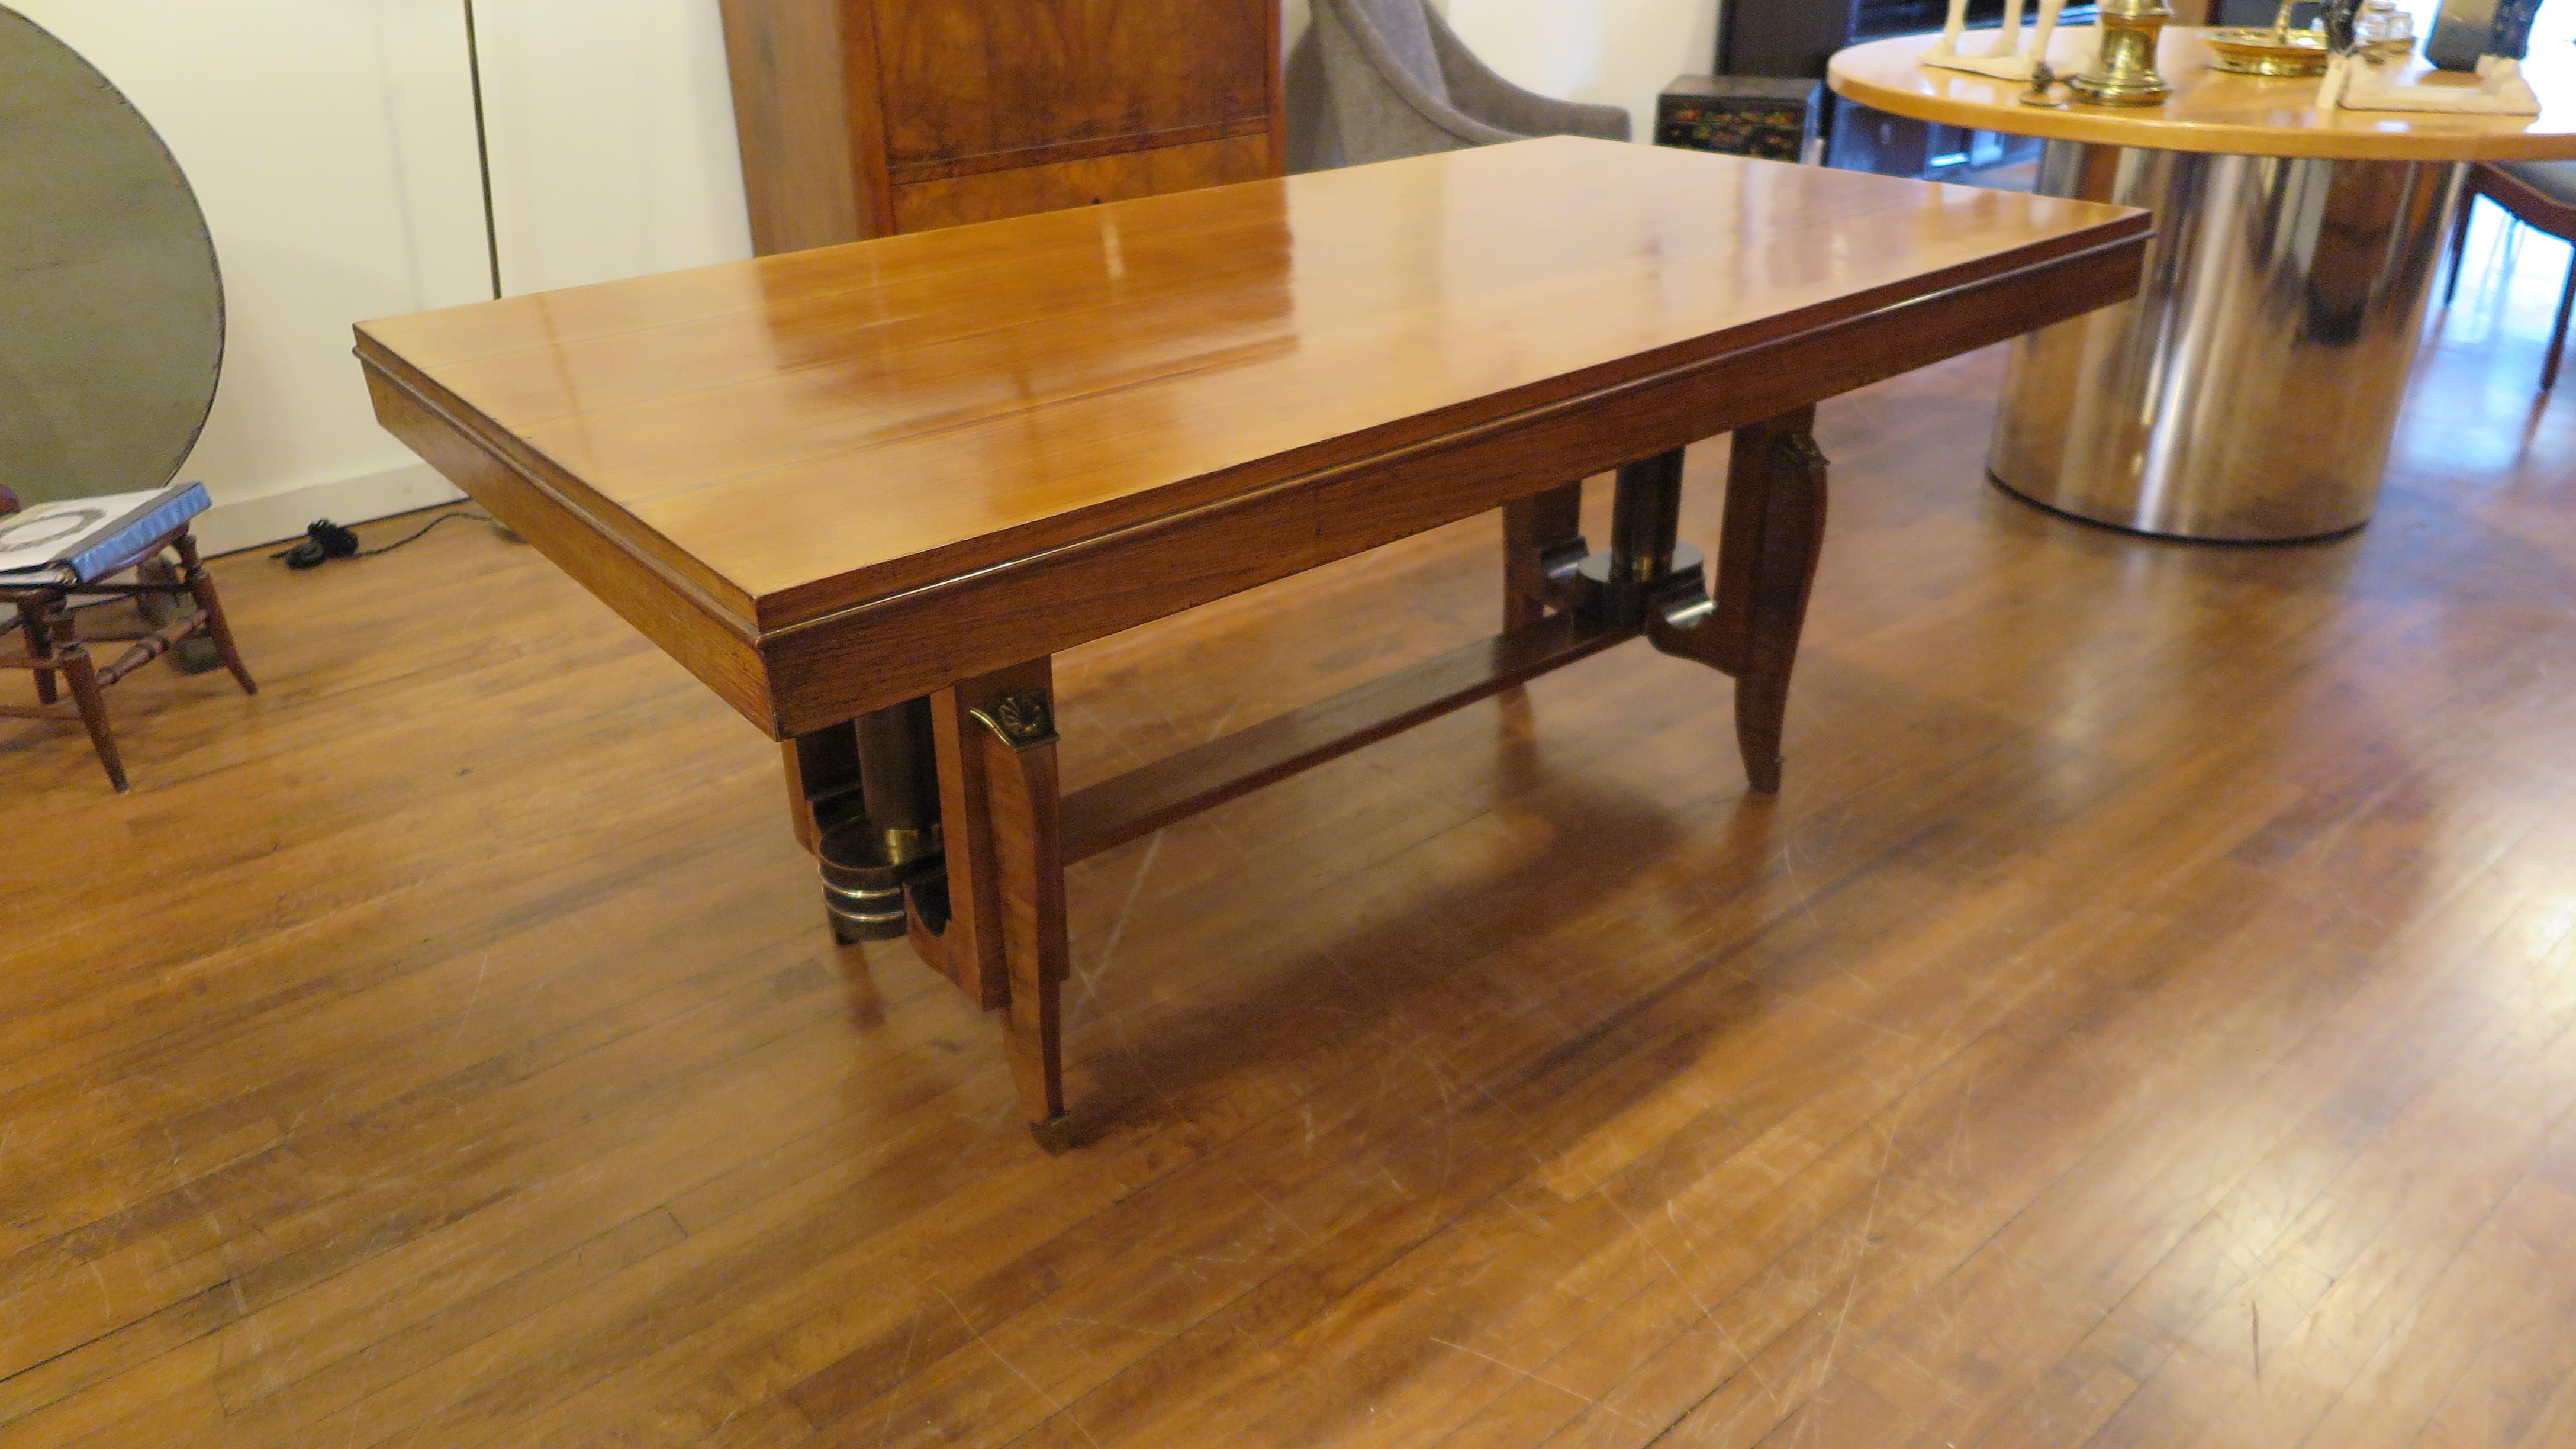 French Art Deco dinning table in the style of Jules Leleu. Extension table having cabriole legs with banding supported by trestle with columns adorned with brass details. There are two drawers that pull out, one on each end of the table. The drawers